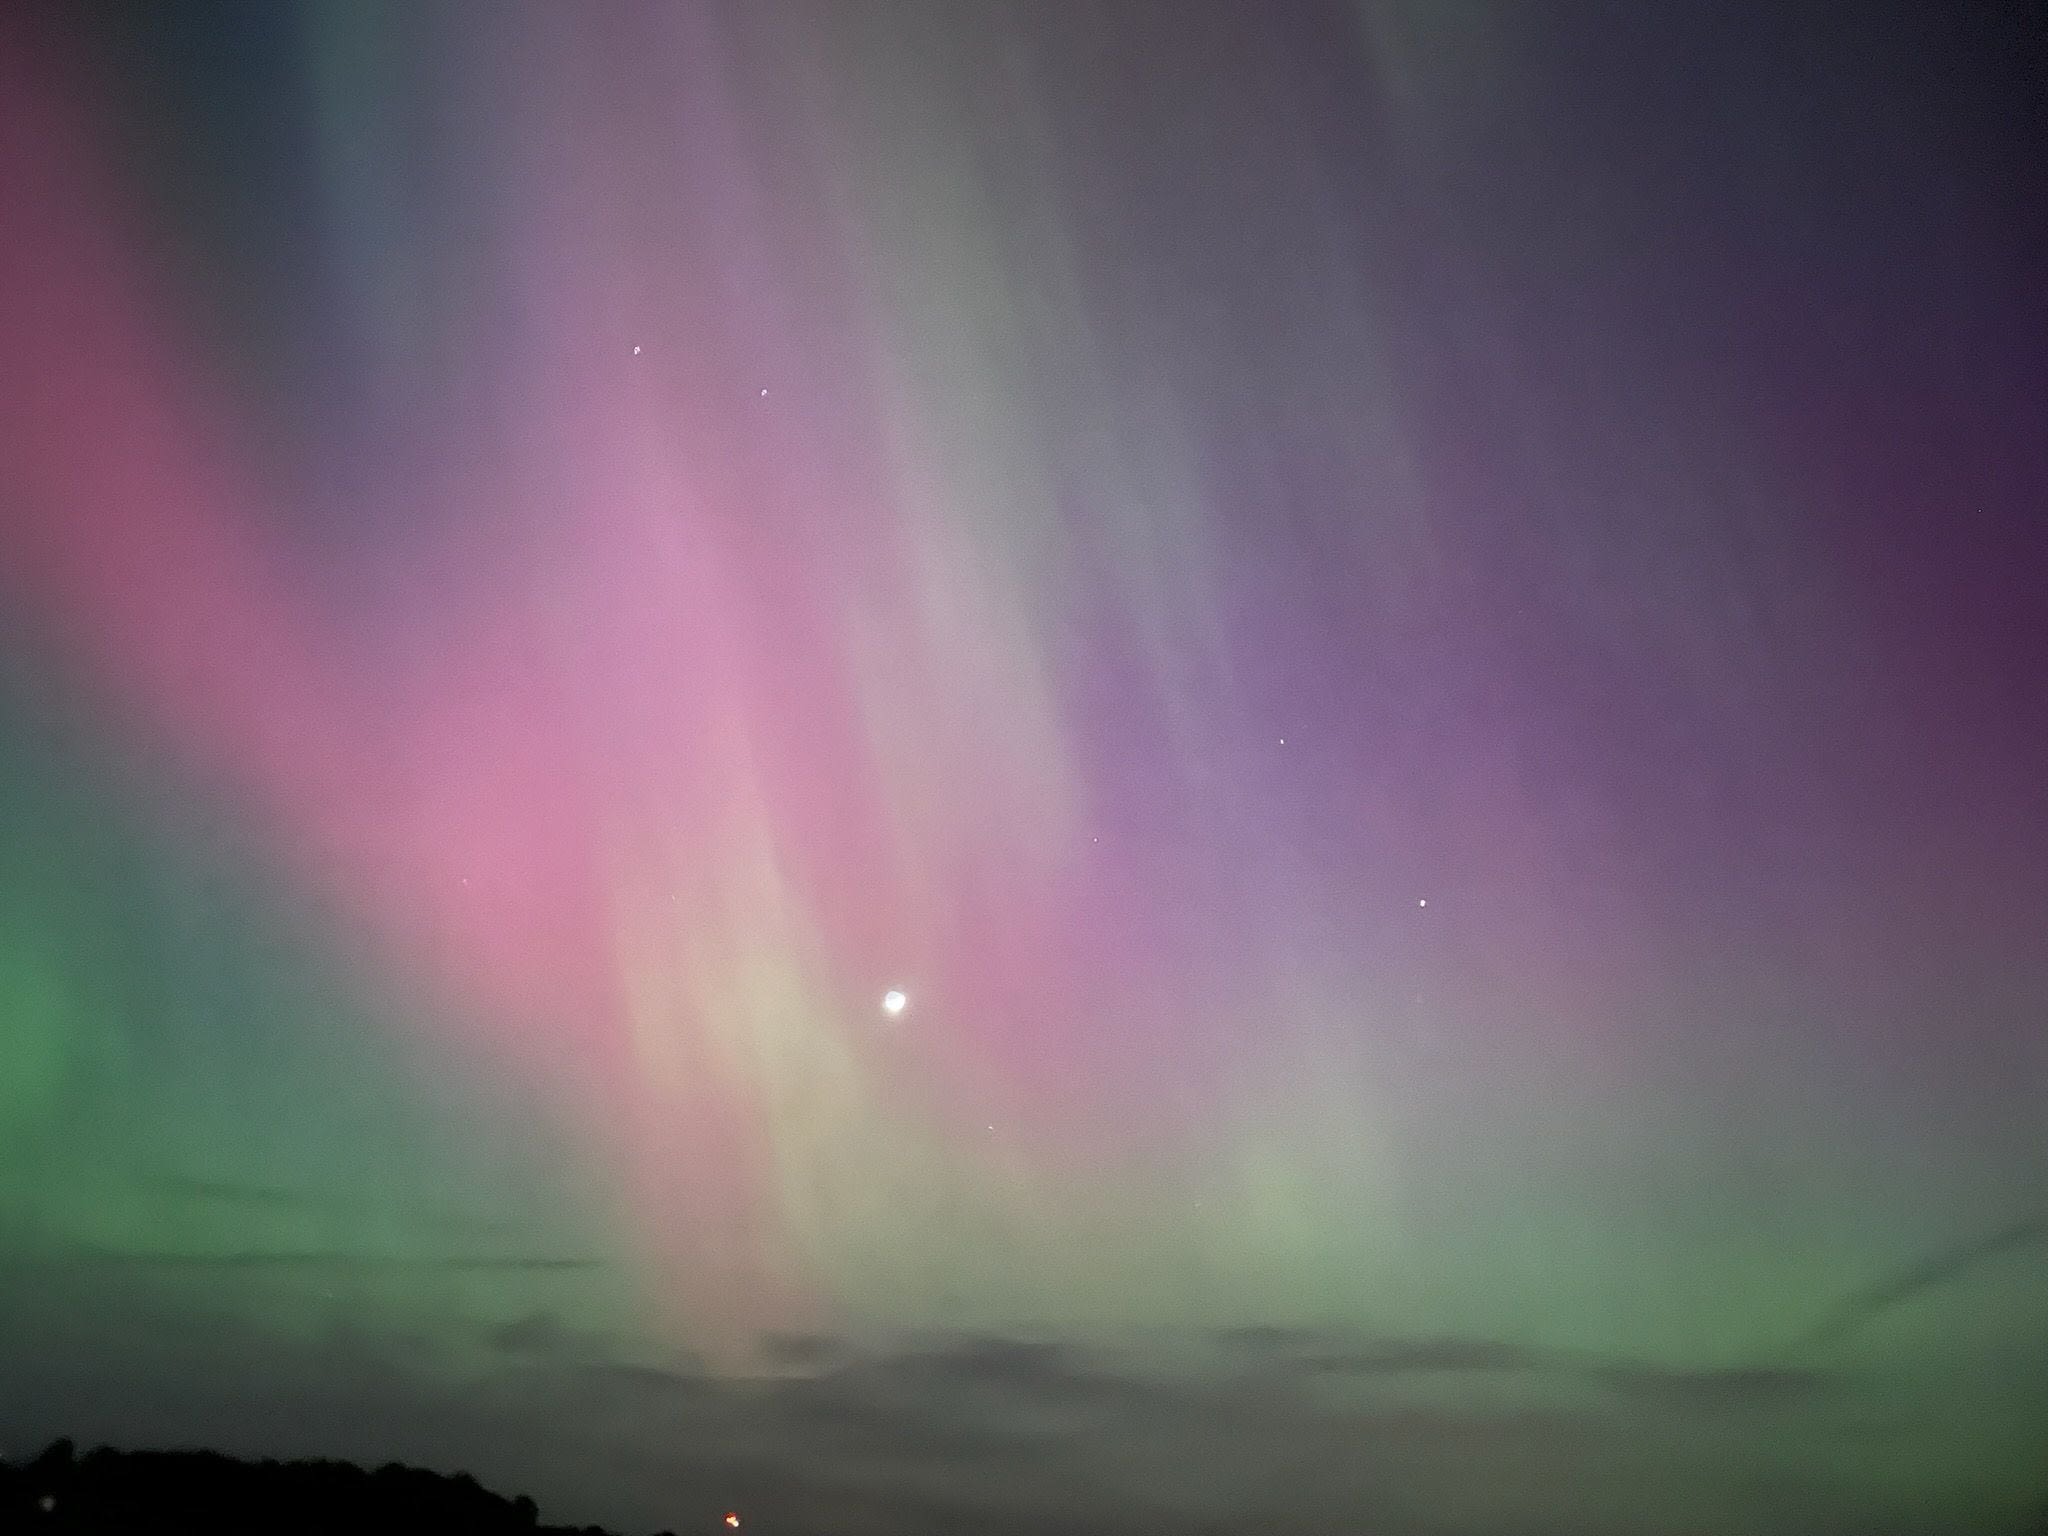 Ohioans could see northern lights tonight due to rare solar event